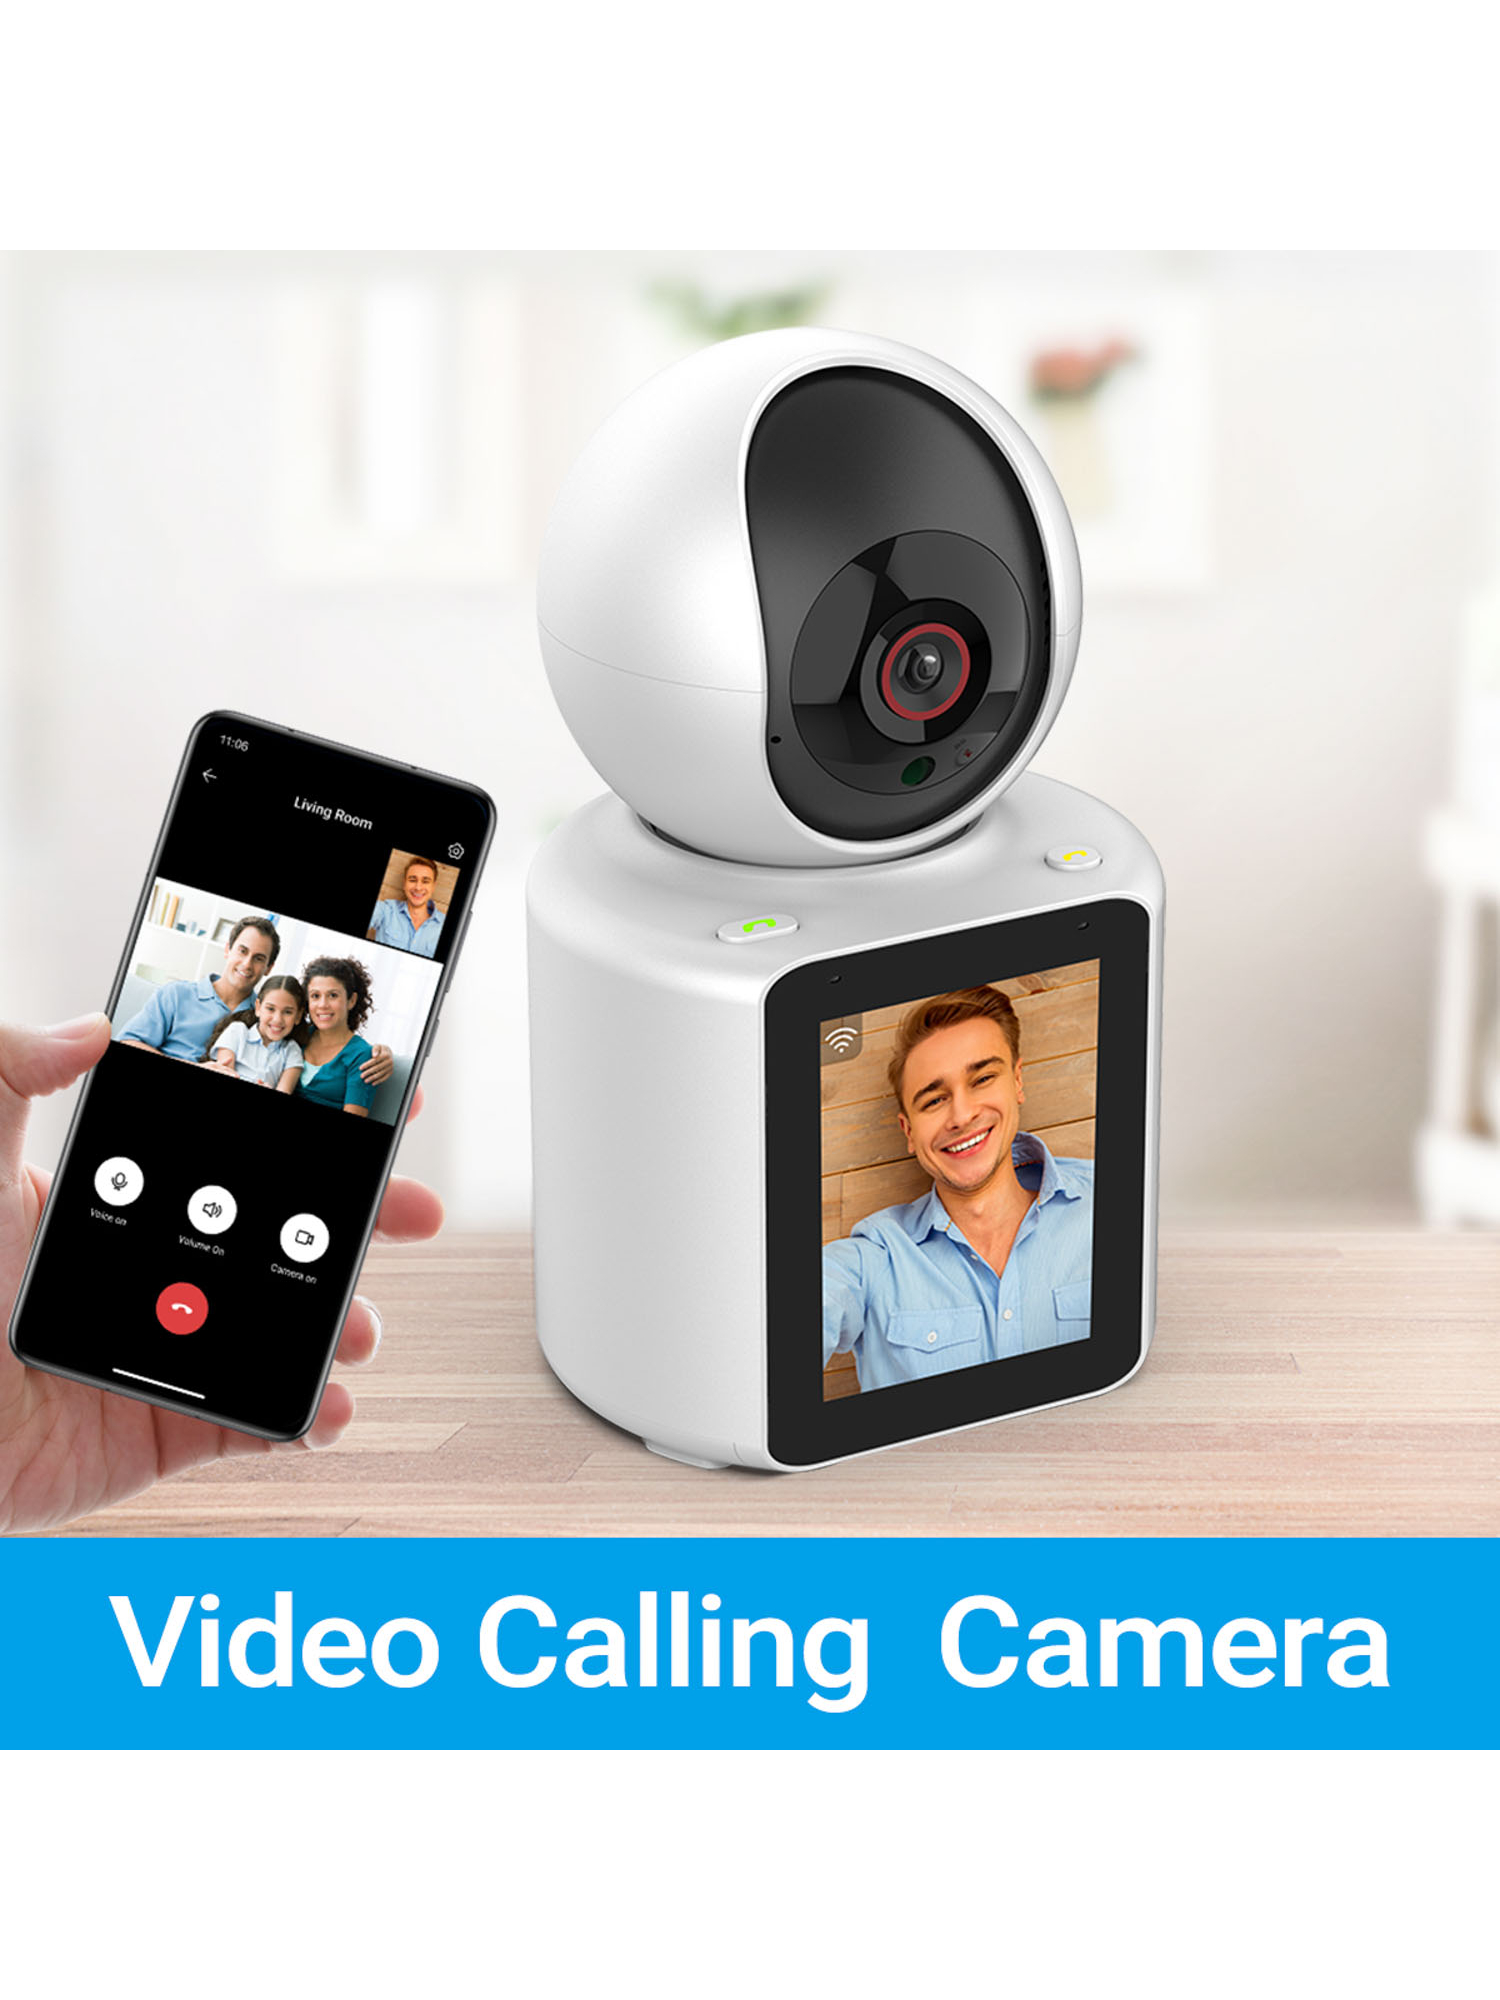 Amuqkark Two-Way Video Call Camera, 2.8-Inch HD Display And Two-Way Video Call Function, Tracking Of Body Movement, Alarm Push